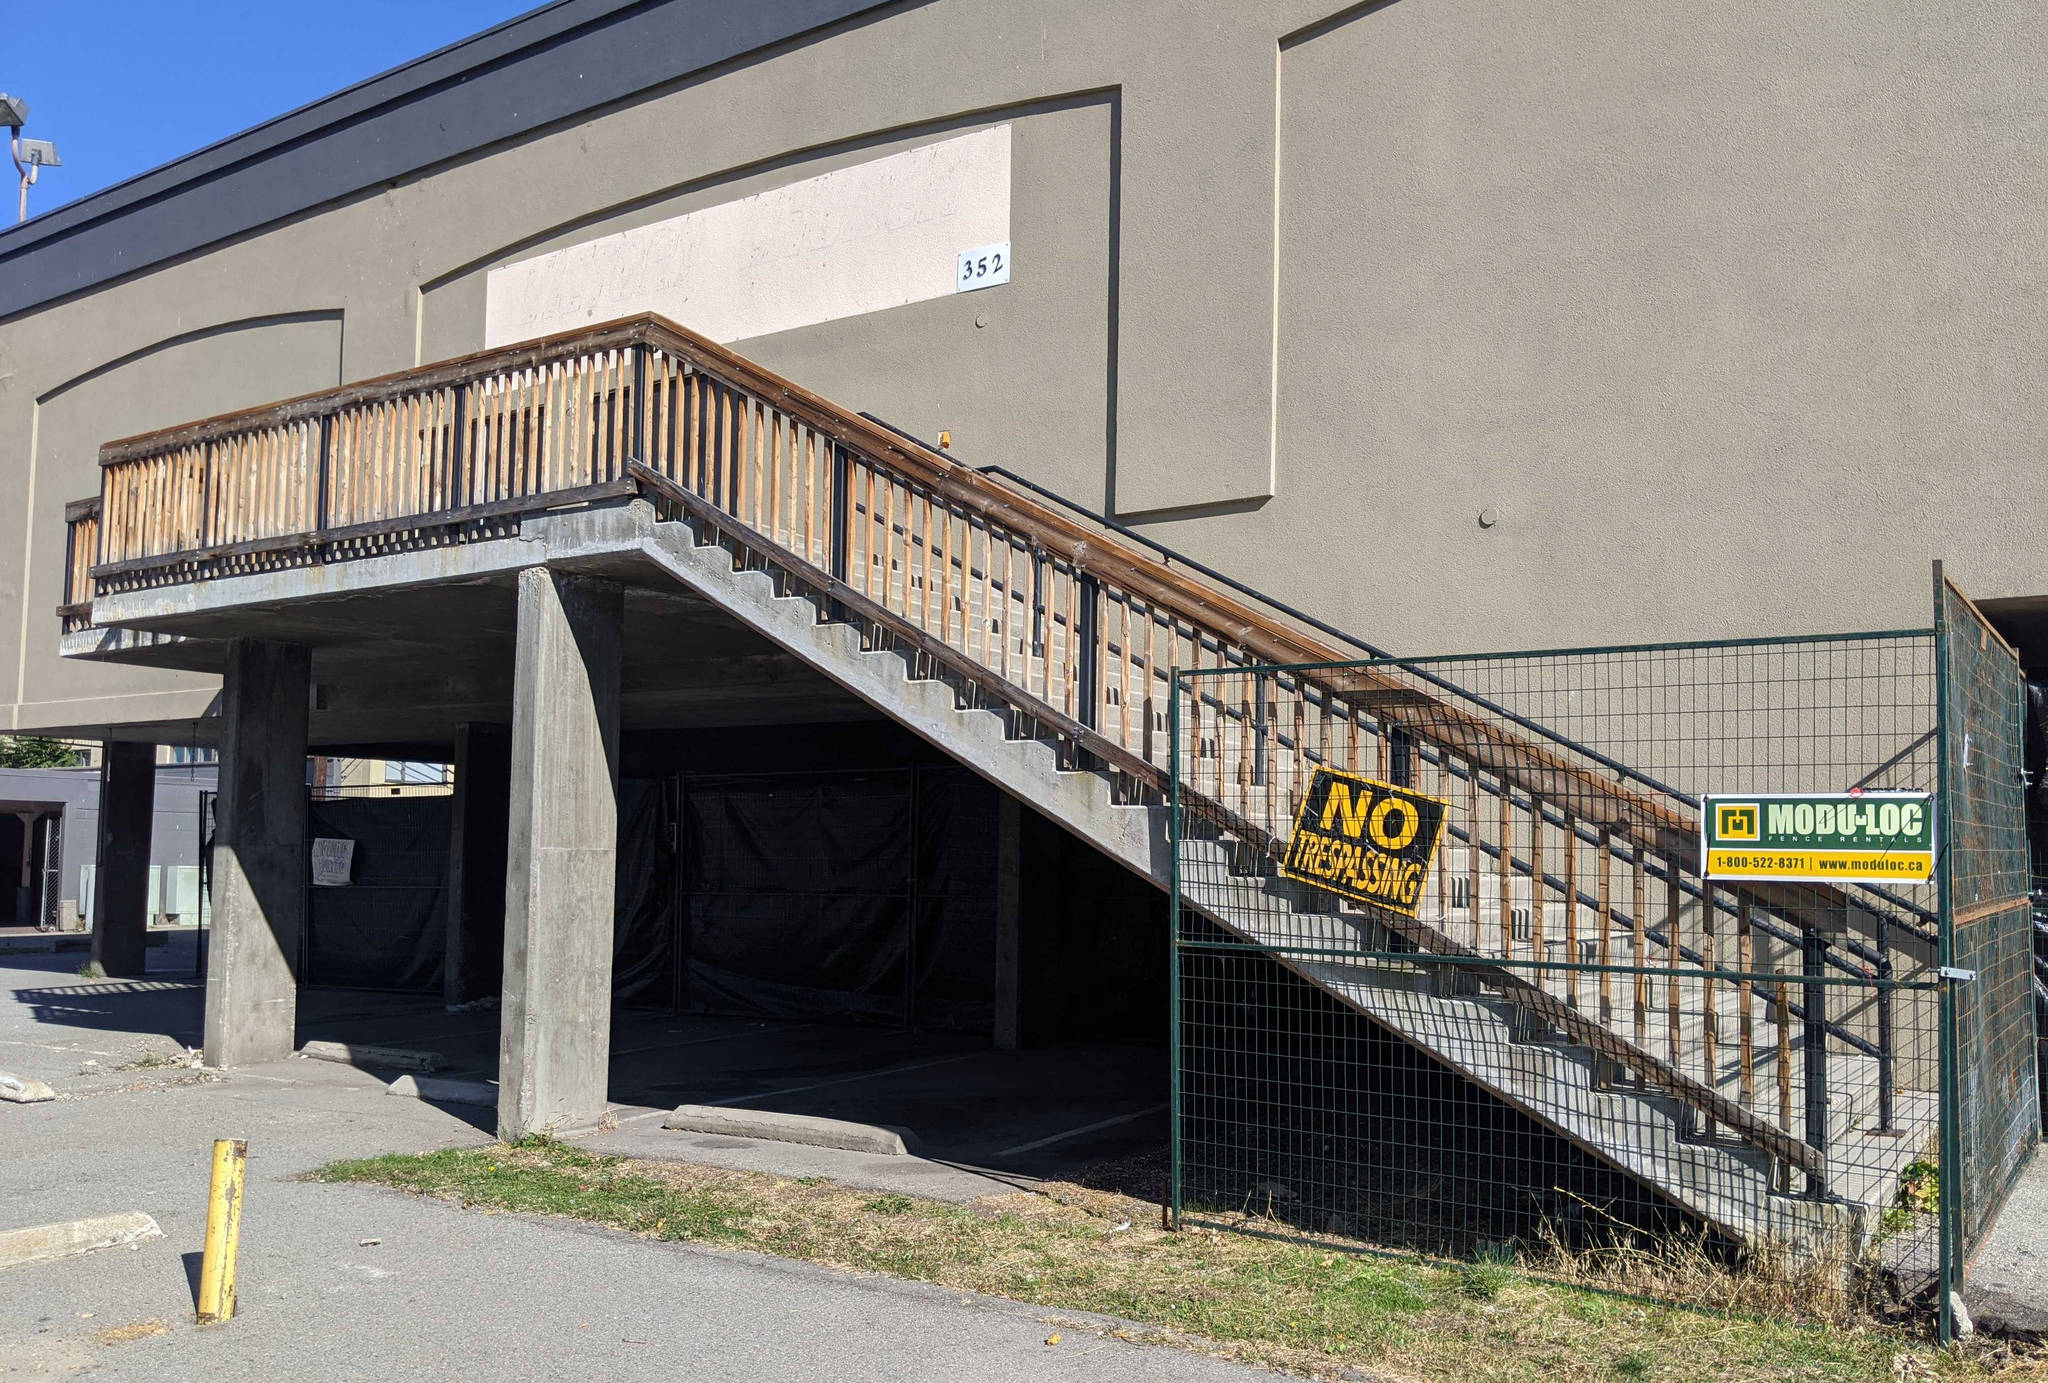 A protest has been planned for March 5, 2020 over Penticton council’s decision to reject an application from BC Housing to keep an emergency winter shelter open over a year longer than originally planned. (Jesse Day - Western News)